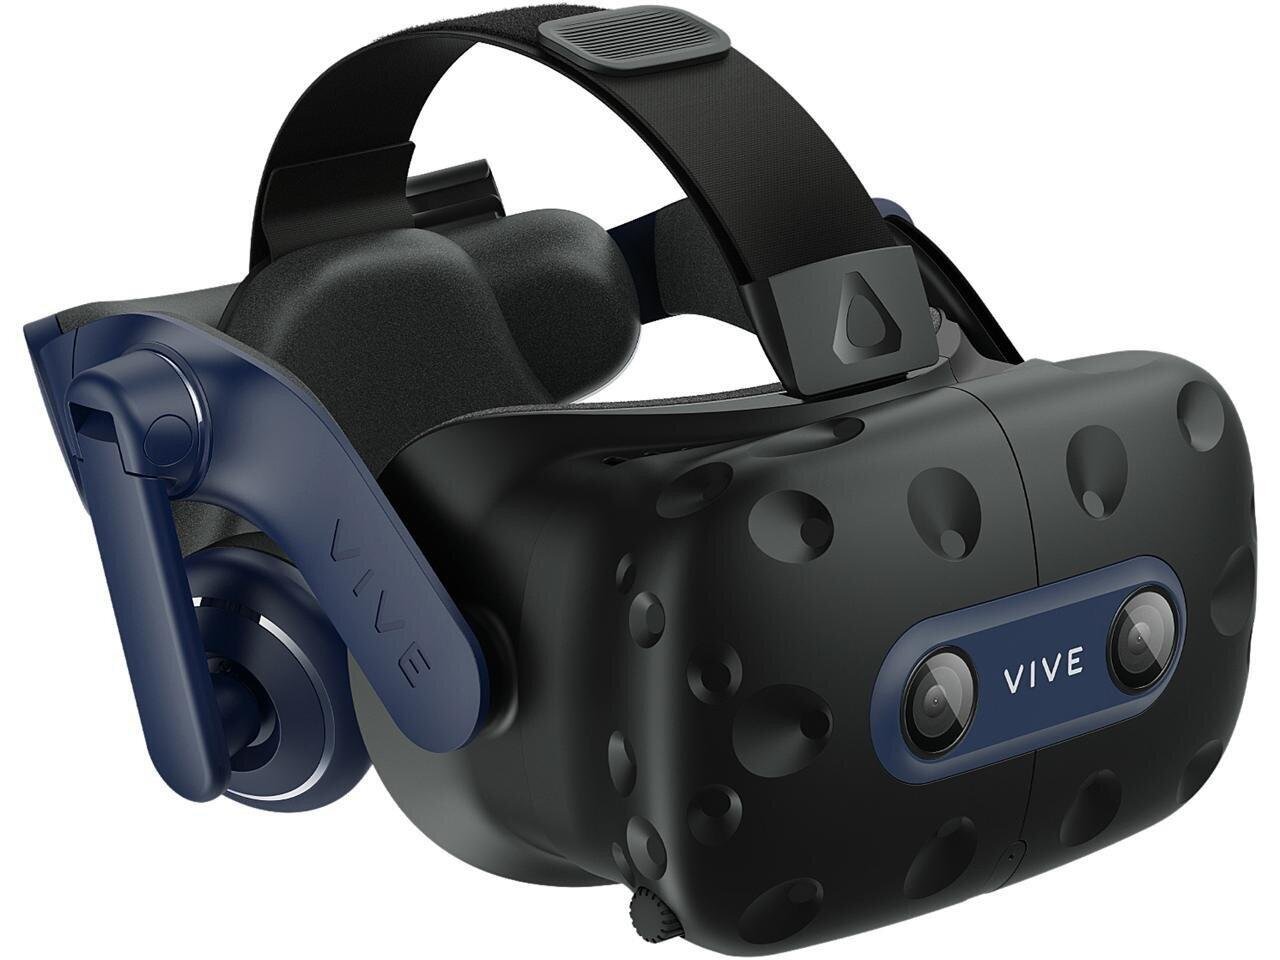 The HTC Vive